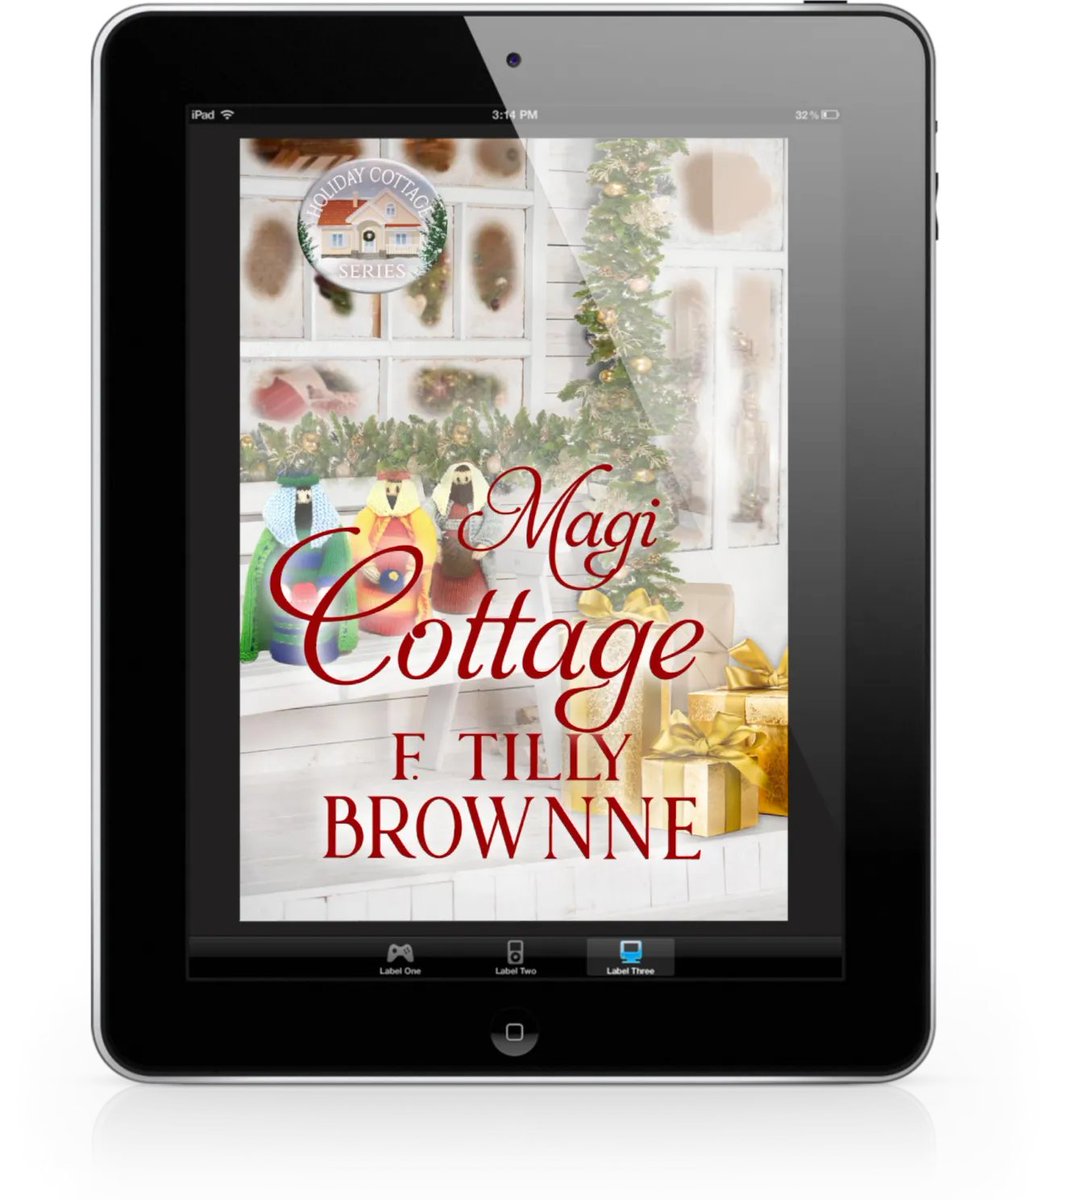 Gran Goldie left clues to a Treasure Hunt behind. Can Frank help her find the Magi's treasure? Magi Cottage in the #HolidayCottage series , by F. Tilly Brownne. #KindleEbook #KU Get it now: buff.ly/3dzc3nX  #NOVELLA #ChristmasRomance #ebook #ChristianFiction #IARTG